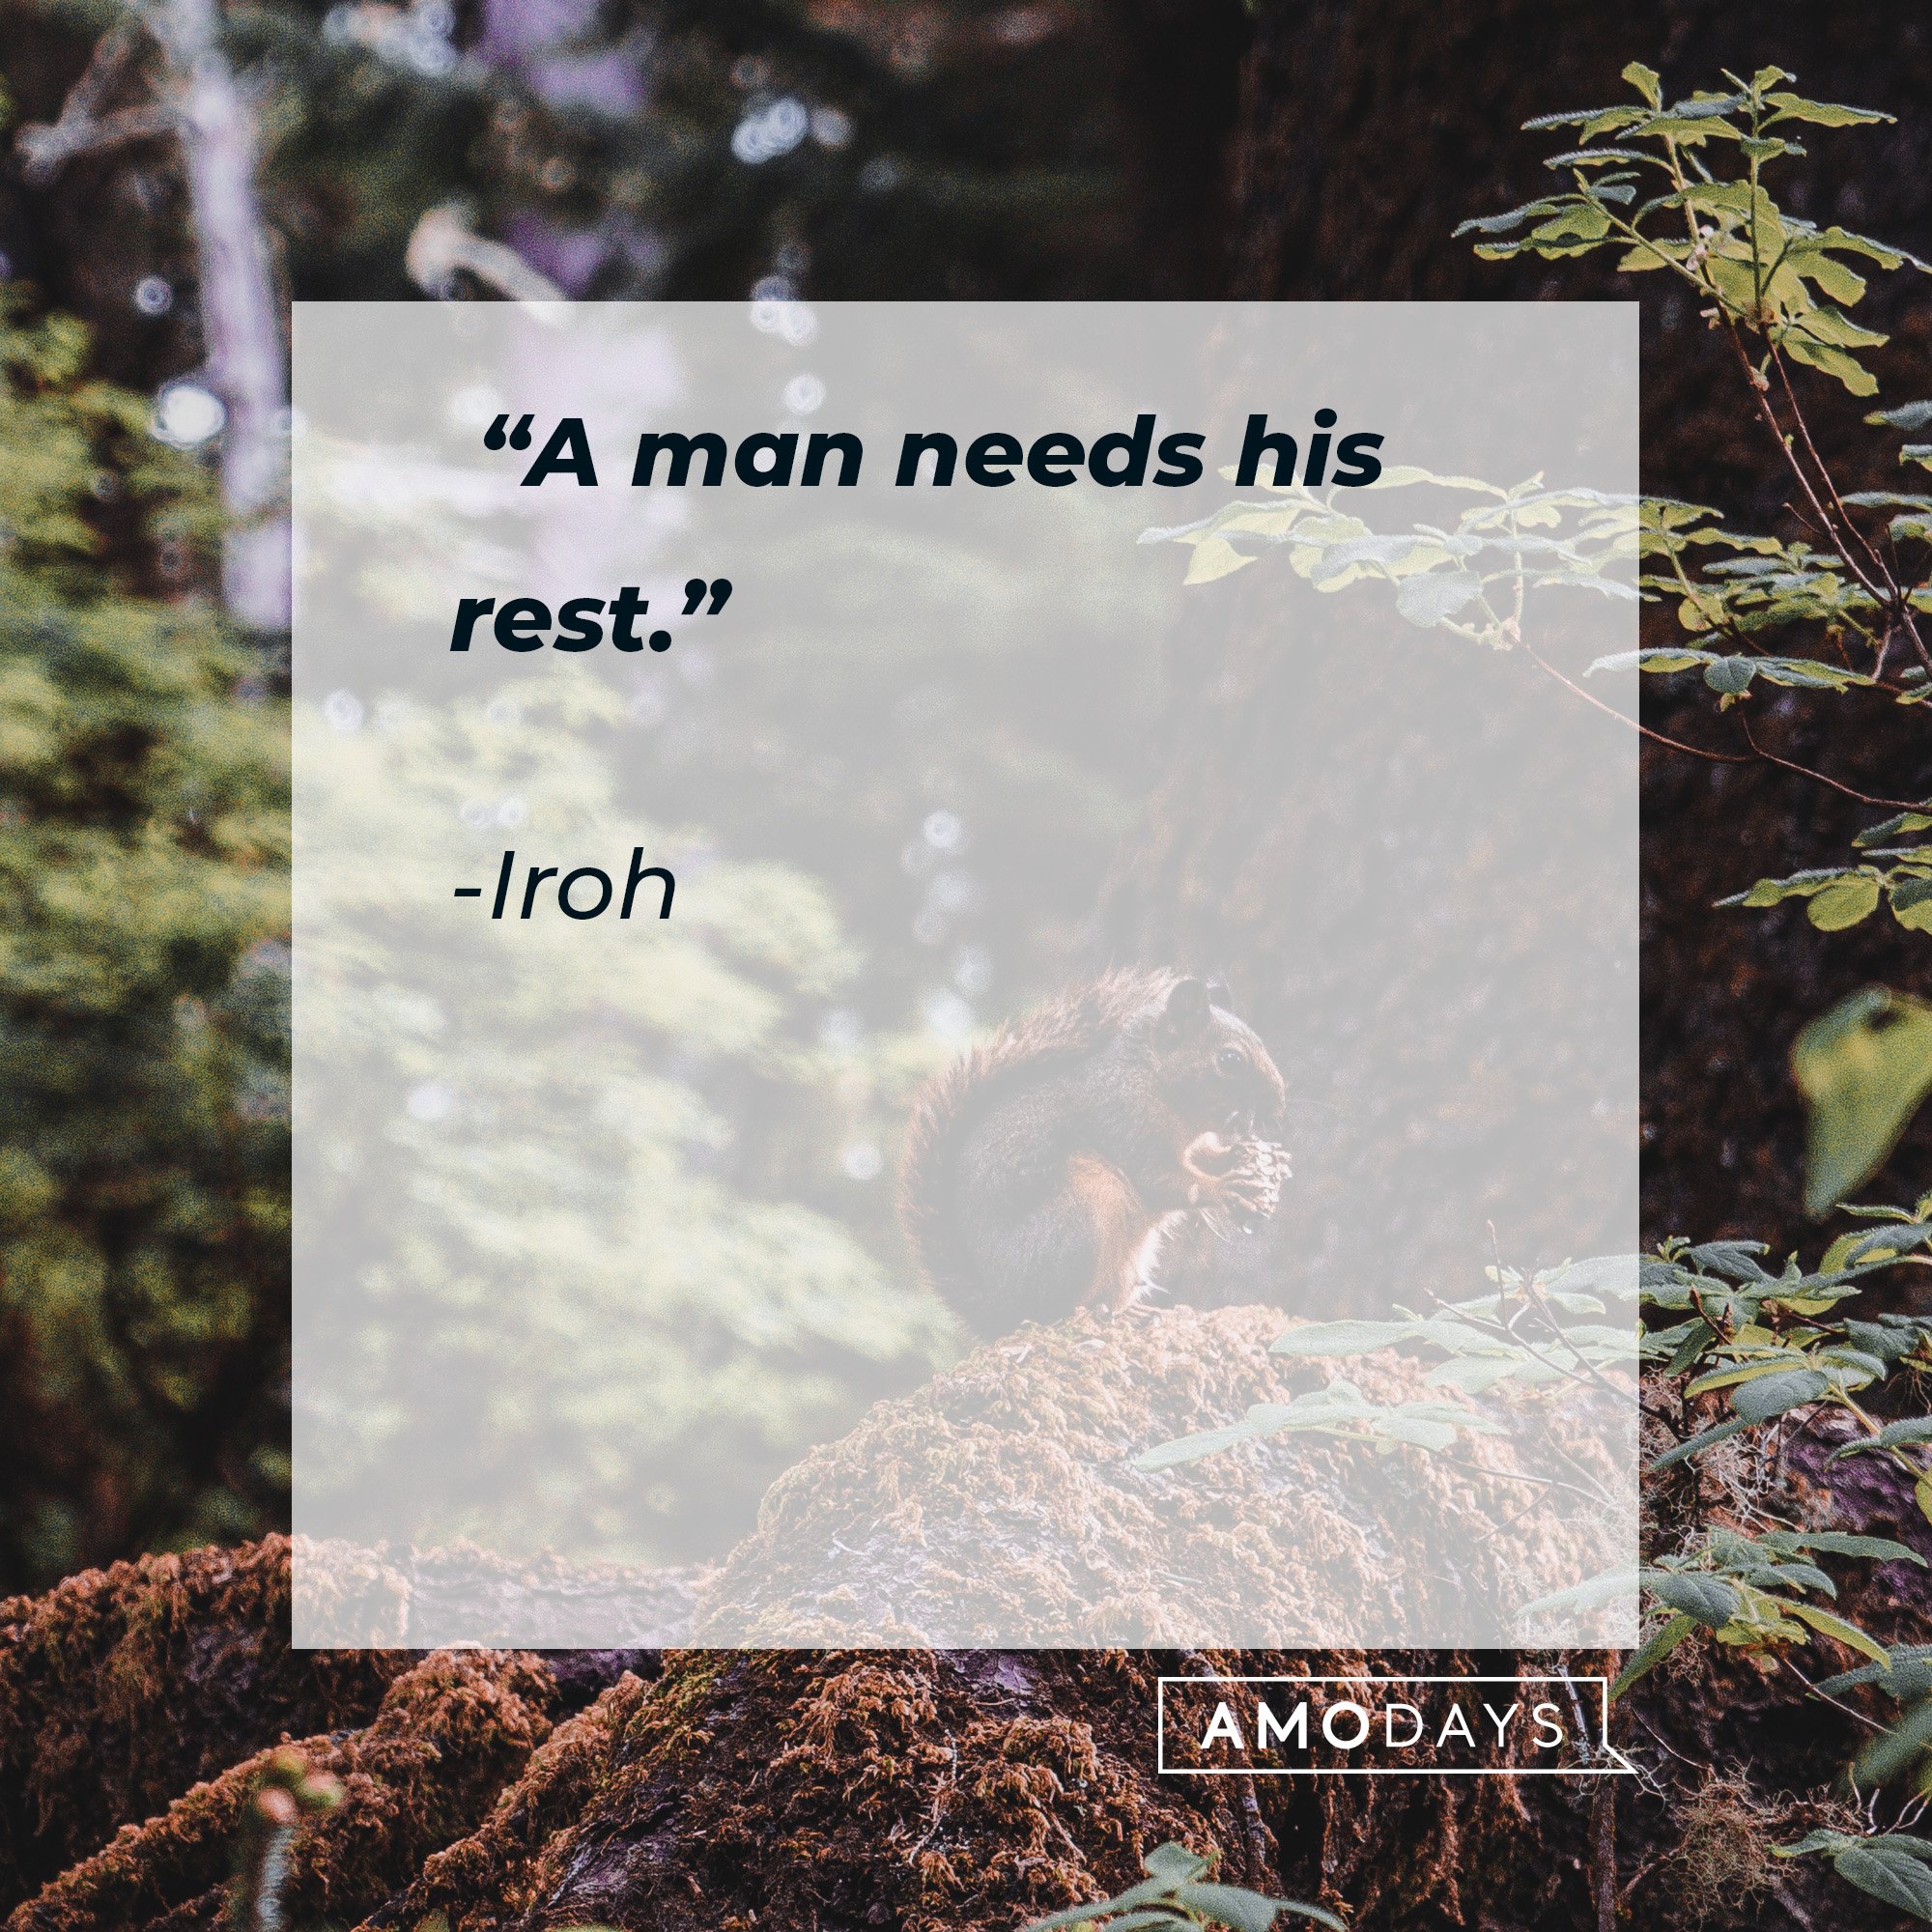 Iroh's quote: “A man needs his rest.” | Image: AmoDays